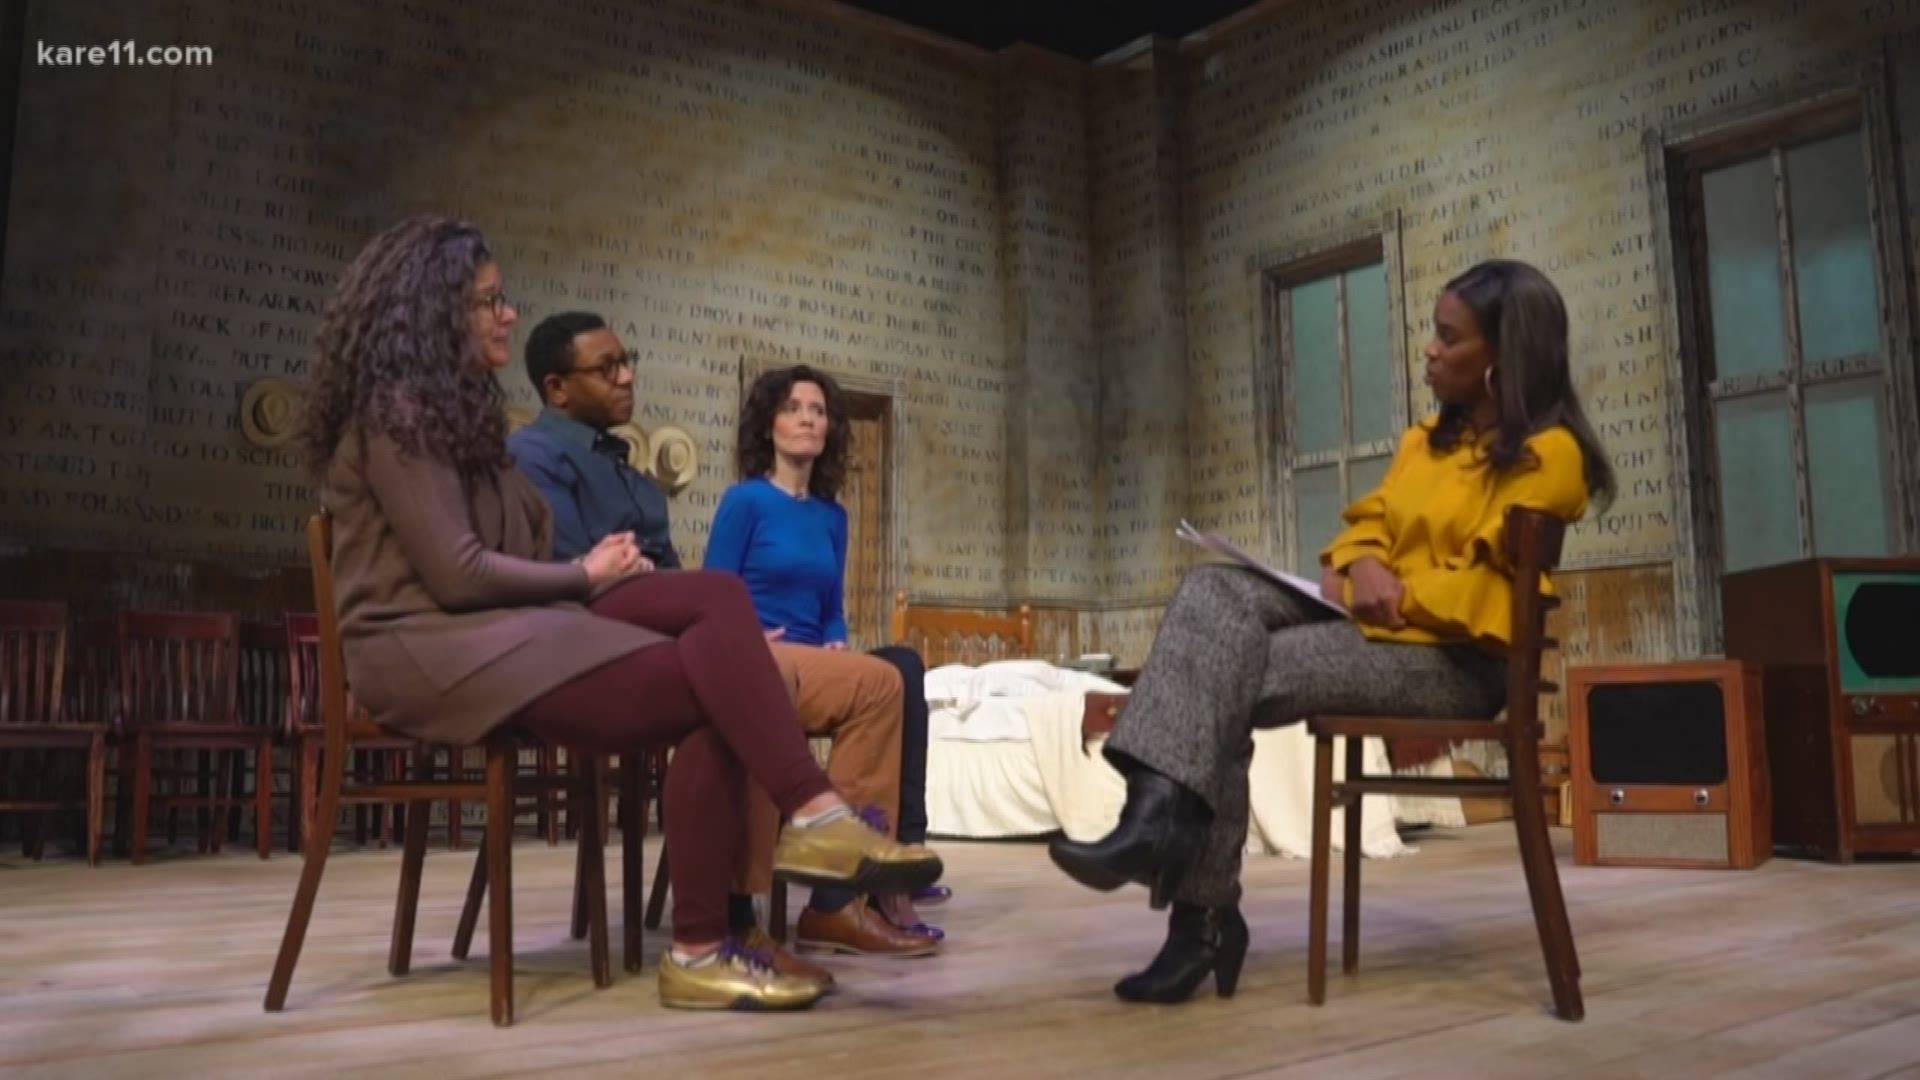 Penumbra Theatre salutes Black History Month with a powerful new play.